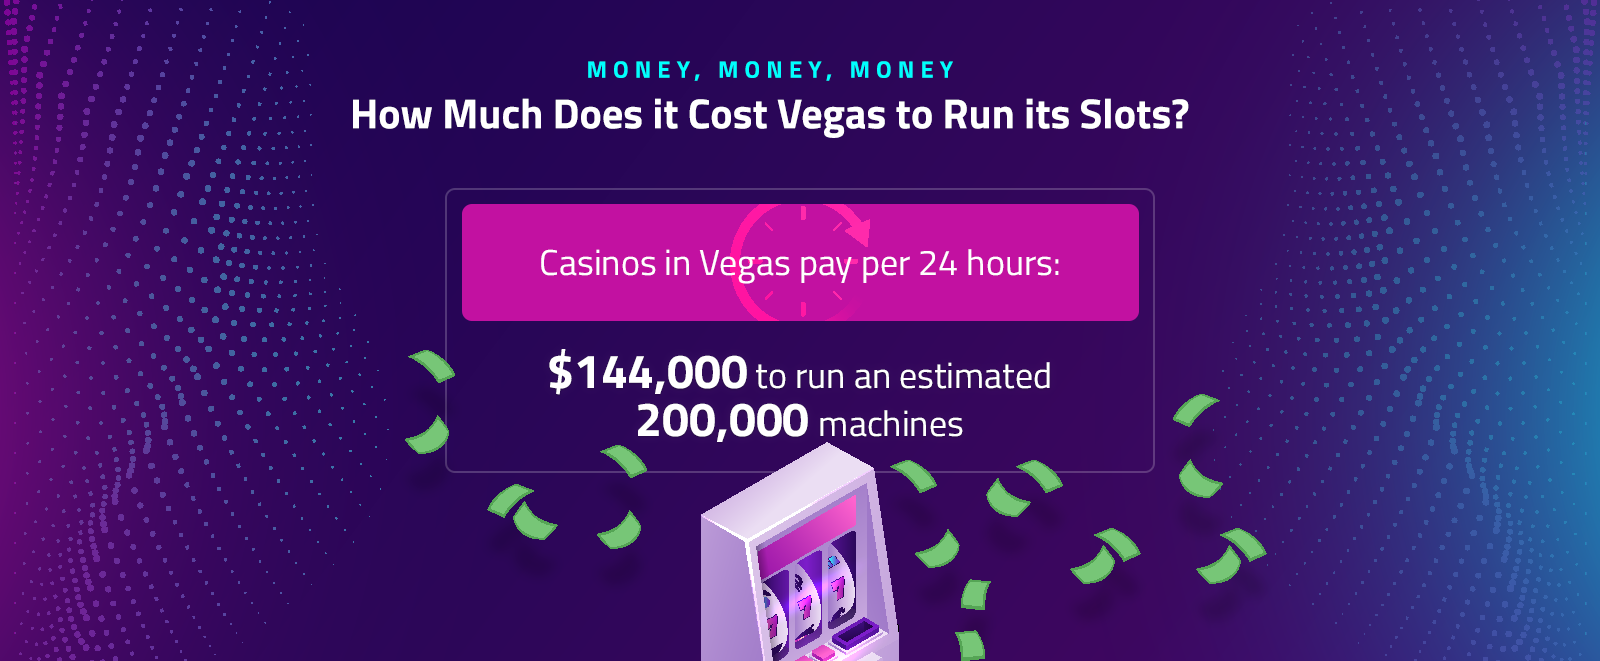 How much does it cost Vegas to run slots?